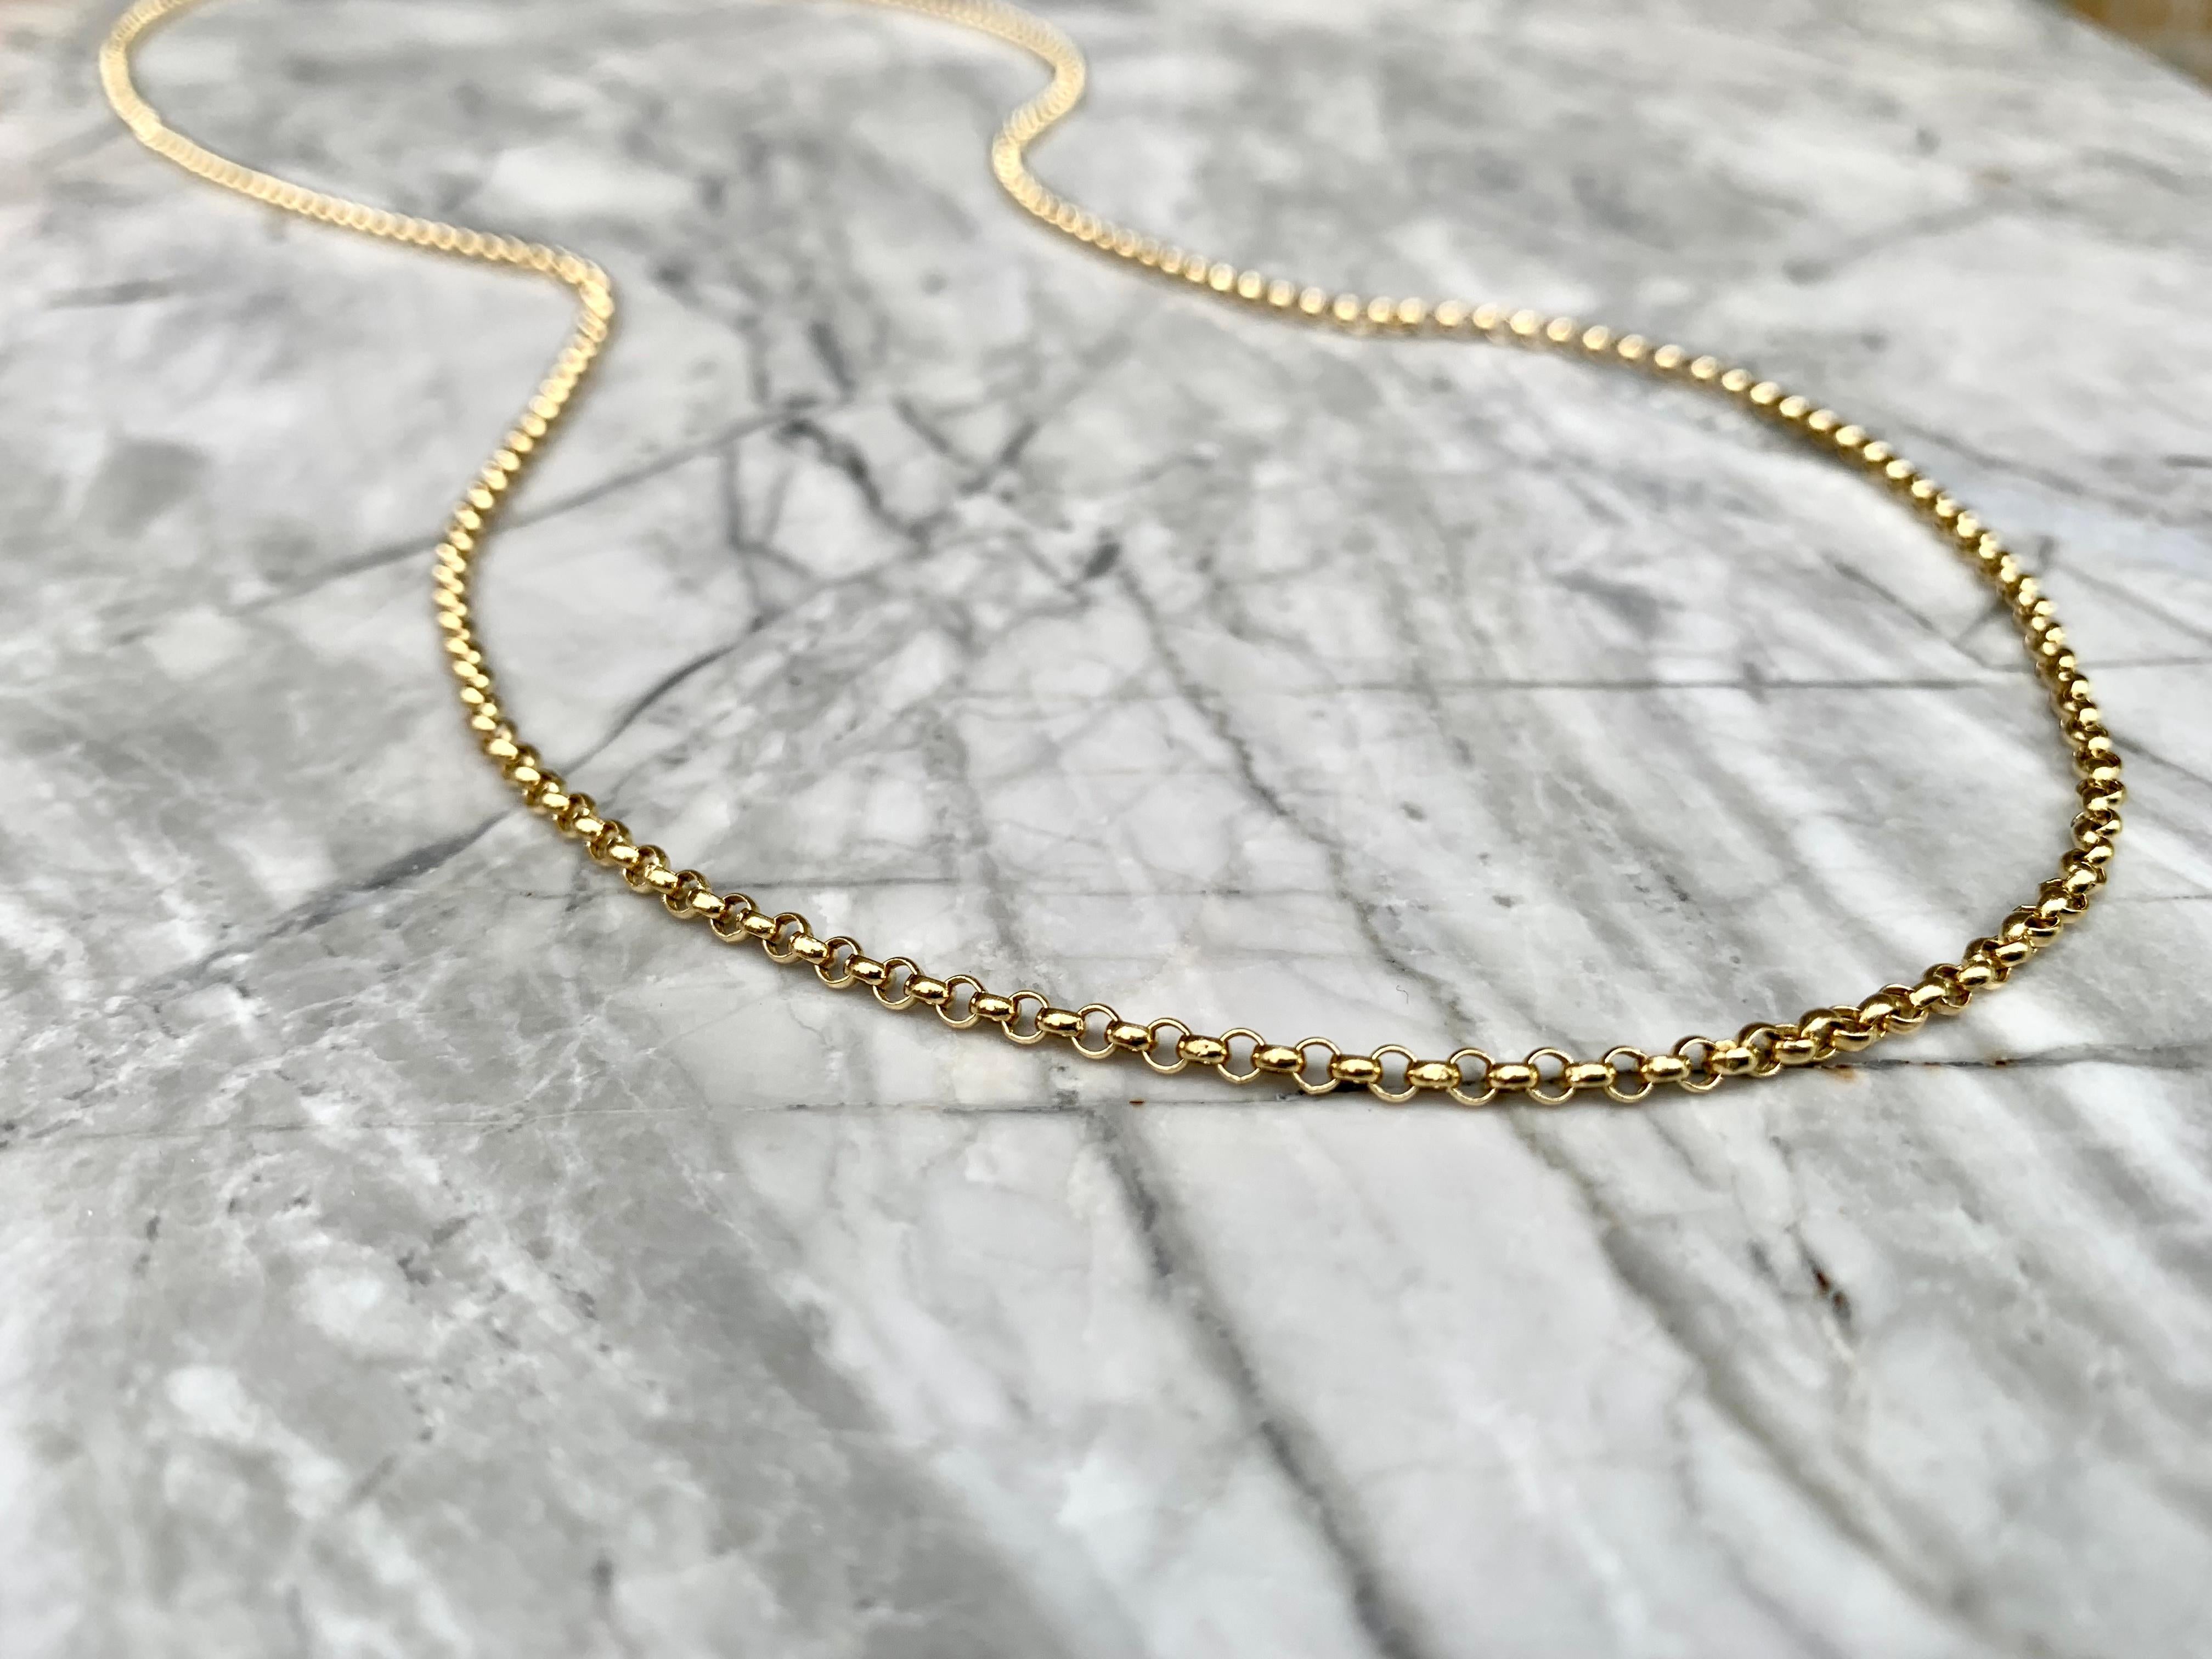 This is our most popular luxury chain!

The luxurious chain of the moment. Gorgeous workmanship, thick and heavy, this 18karat solid gold chain gives you everything. Works very well with all of our pendants to smartly finish off any outfit. 80cm